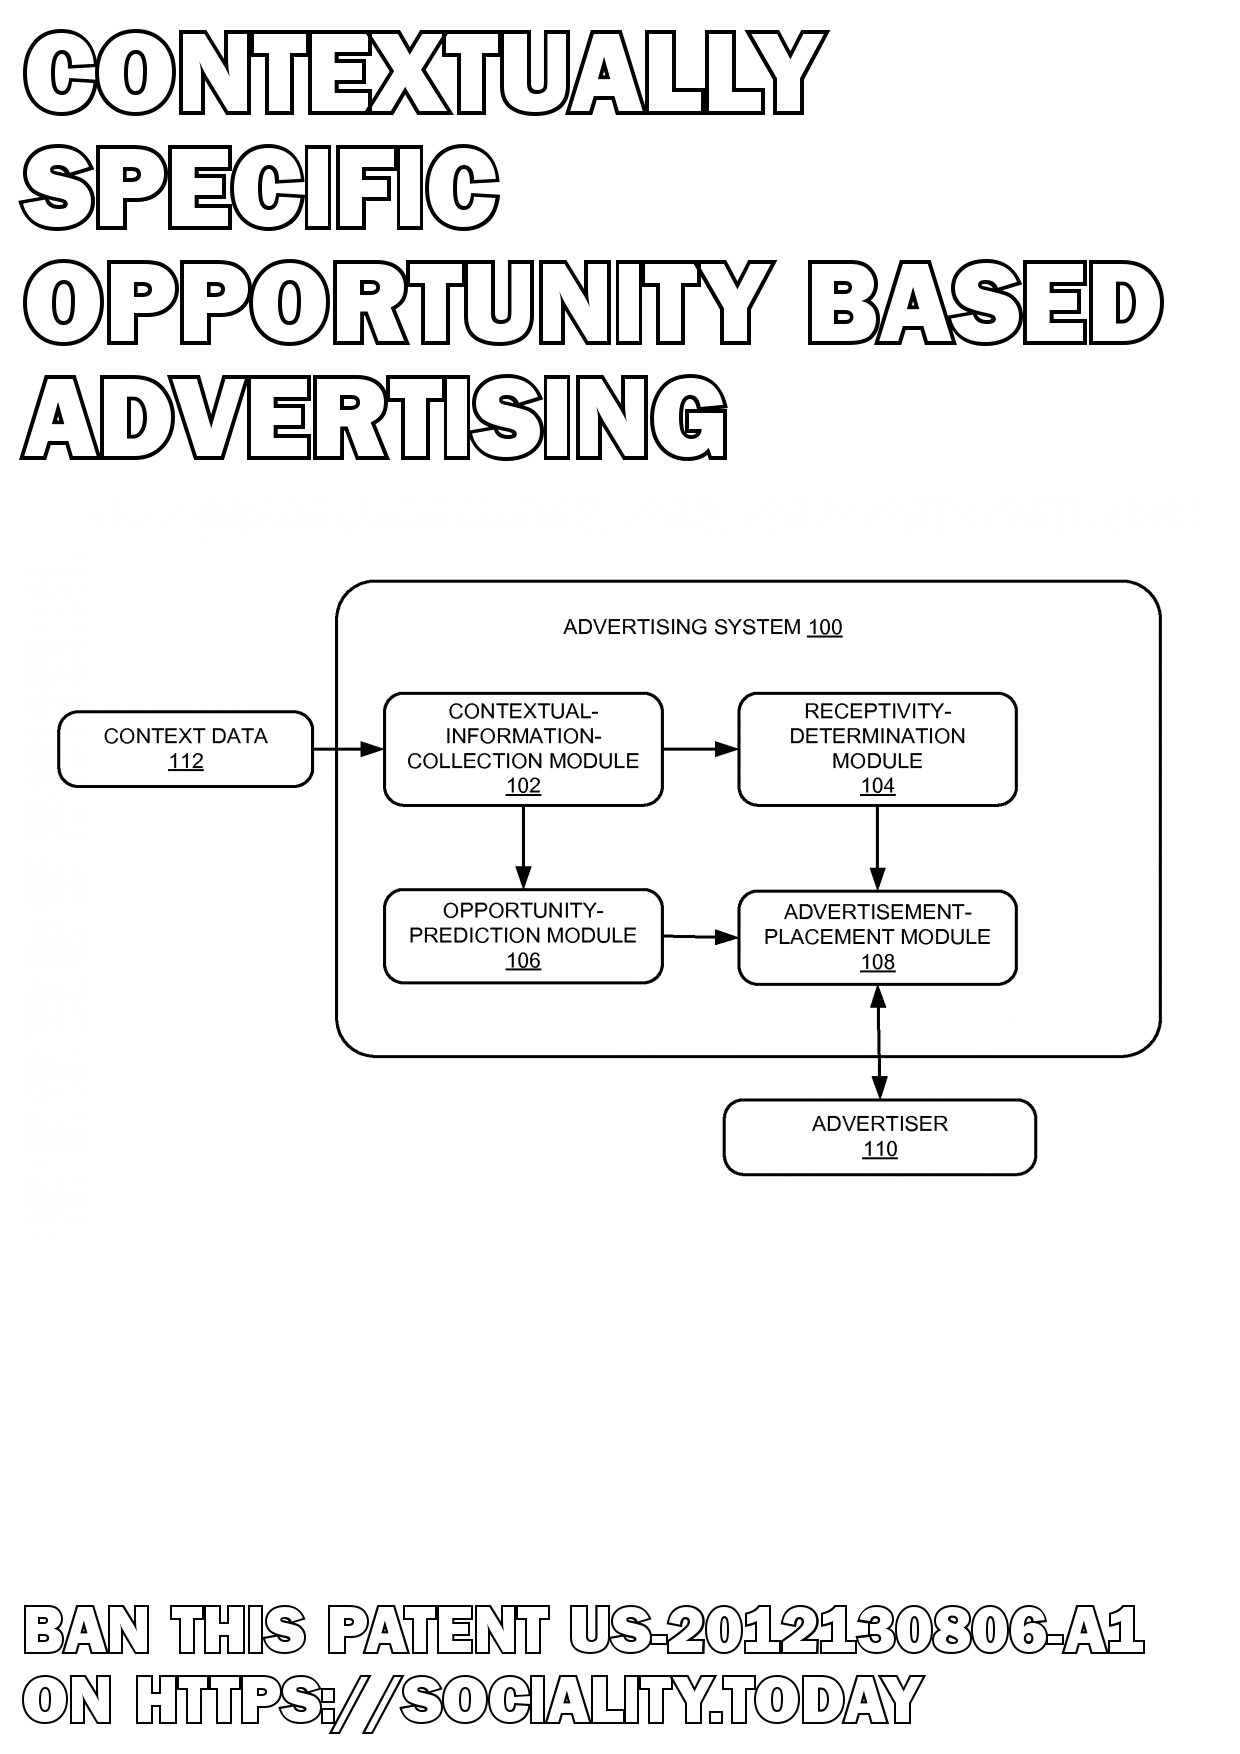 Contextually specific opportunity based advertising  - US-2012130806-A1